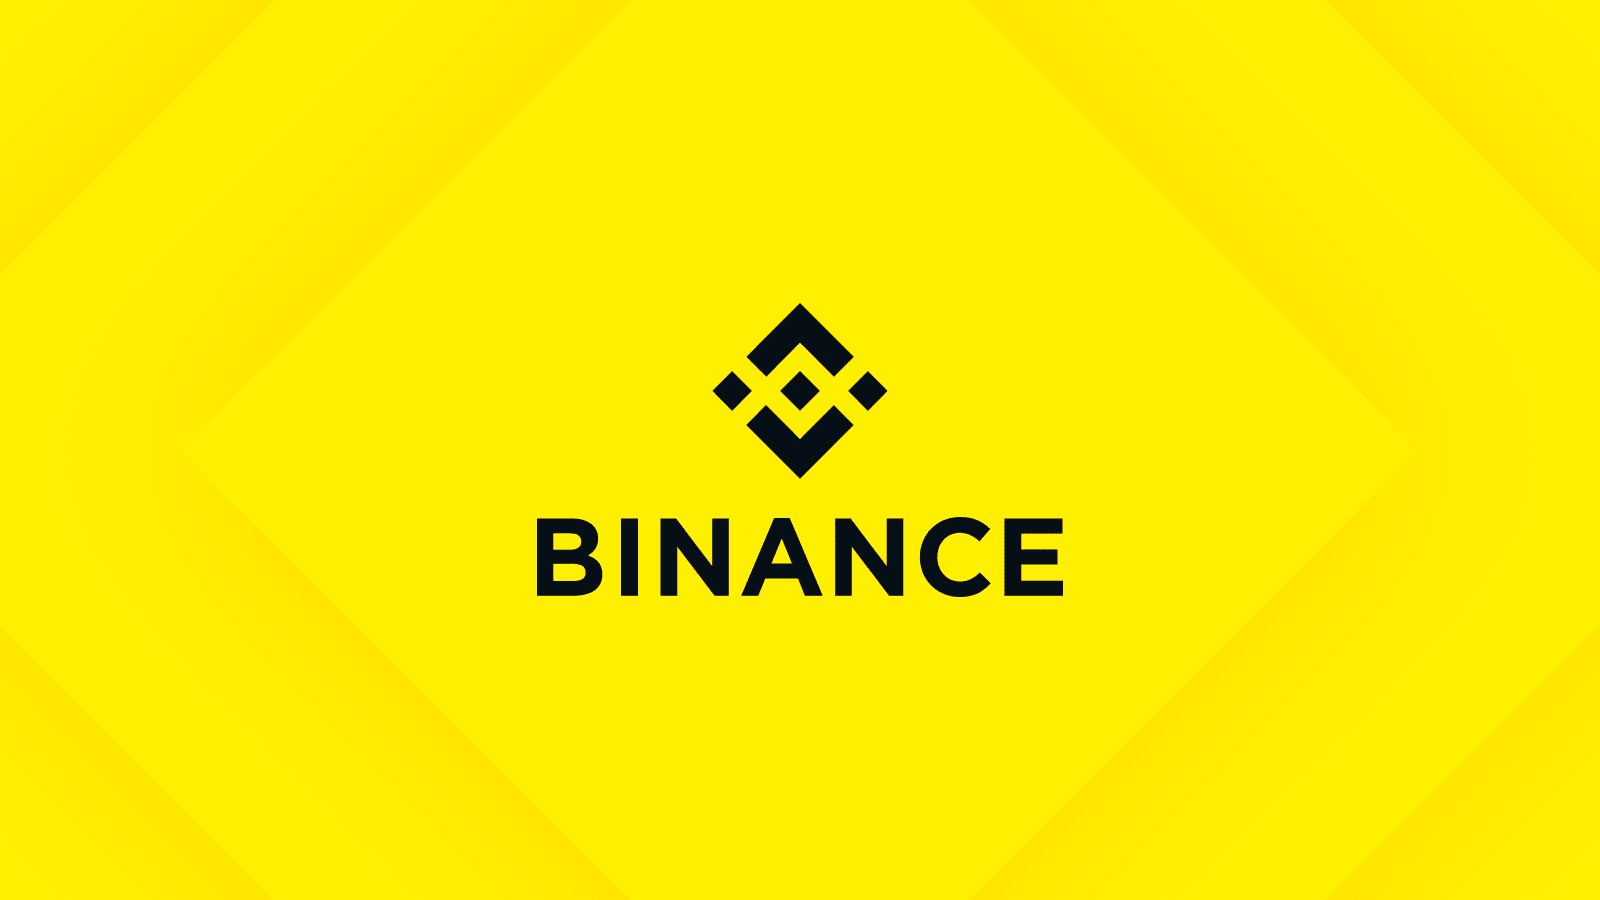 Binance announces major changes to its Turkish operations, including the removal of Turkish language support and cessation of local marketing activities.